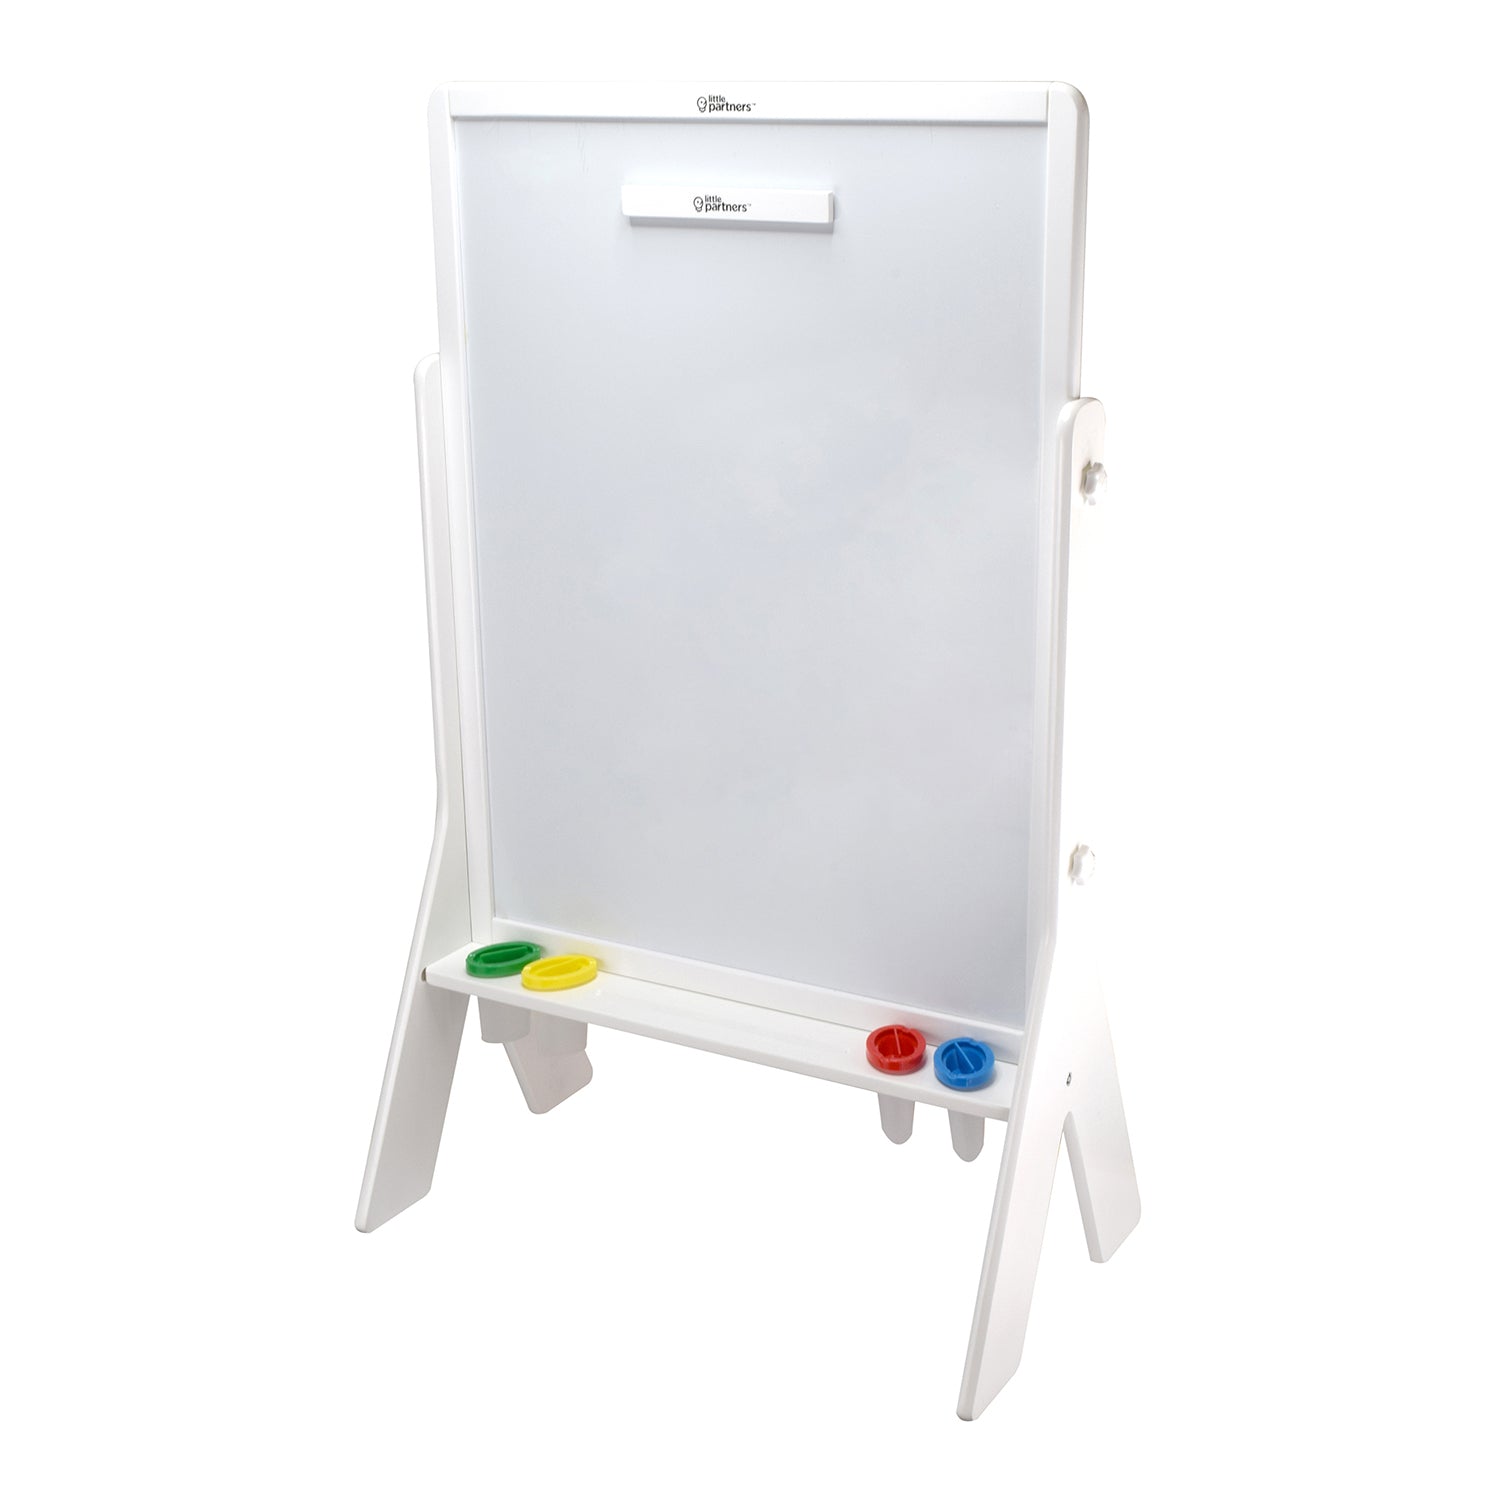 Little Partners Deluxe Learn N Play Art Center Easel - Olive Green